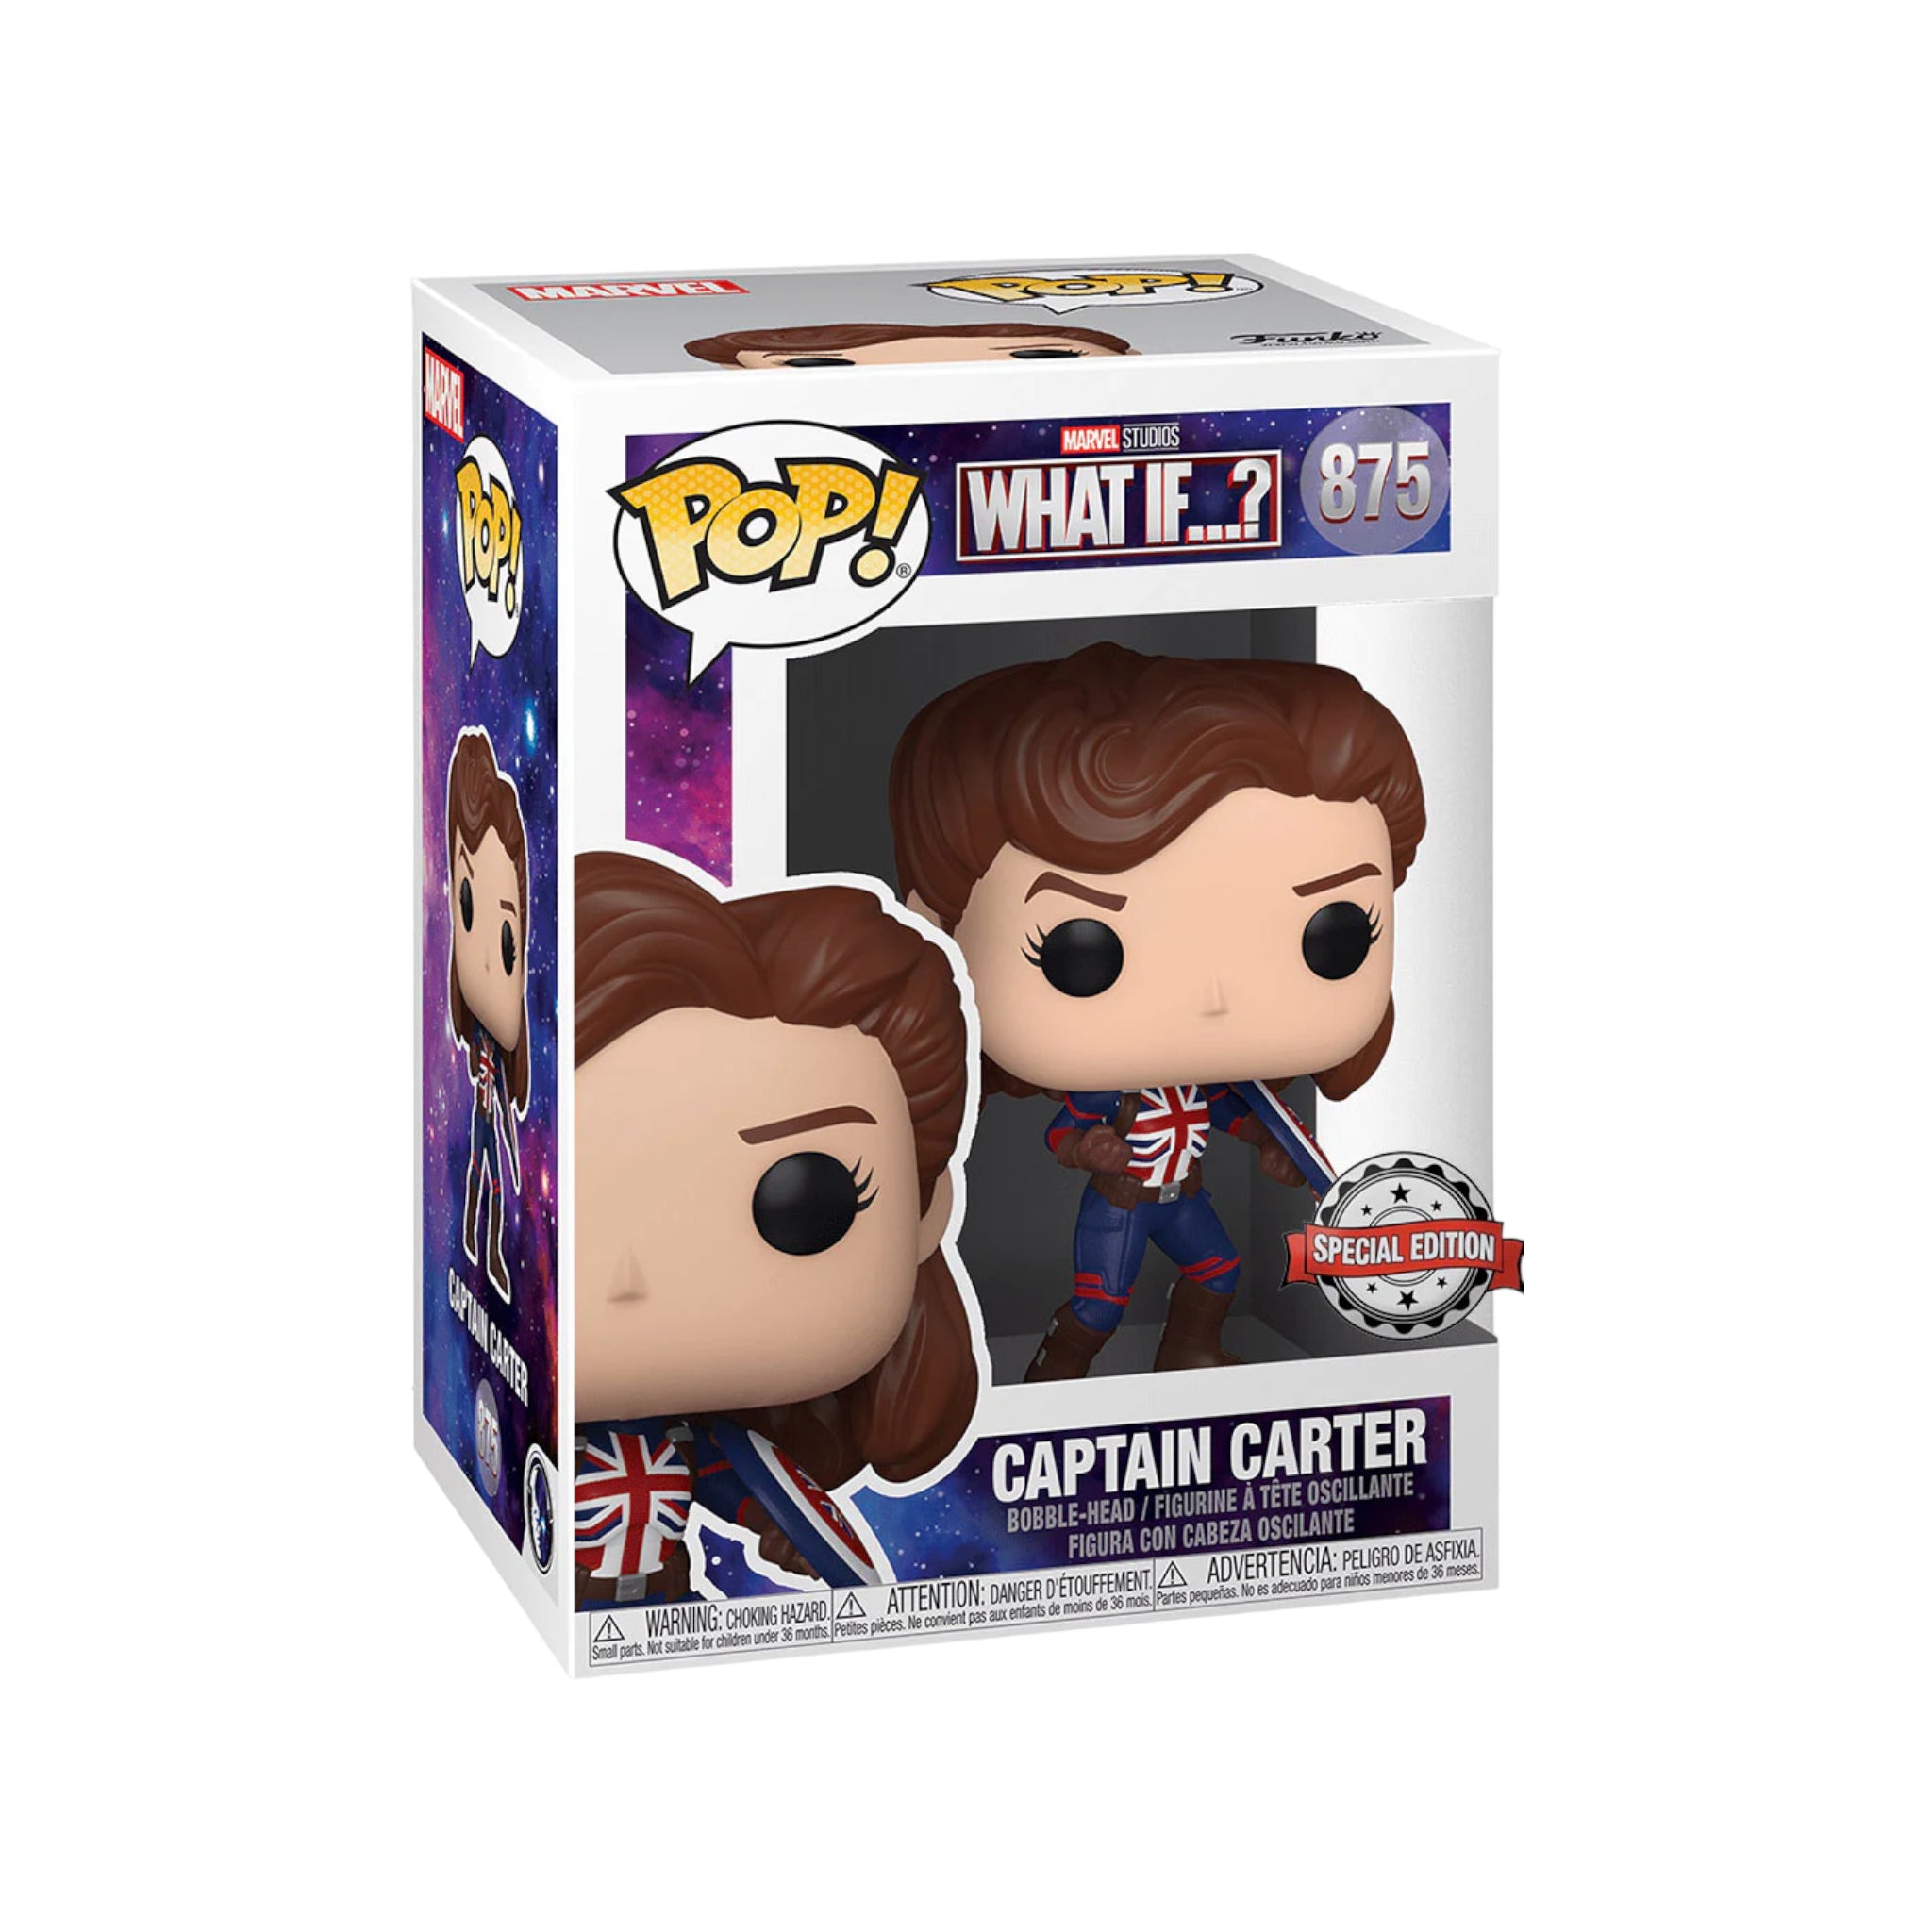 Captain Carter #875 Funko Pop! - What If...? - Special Edition